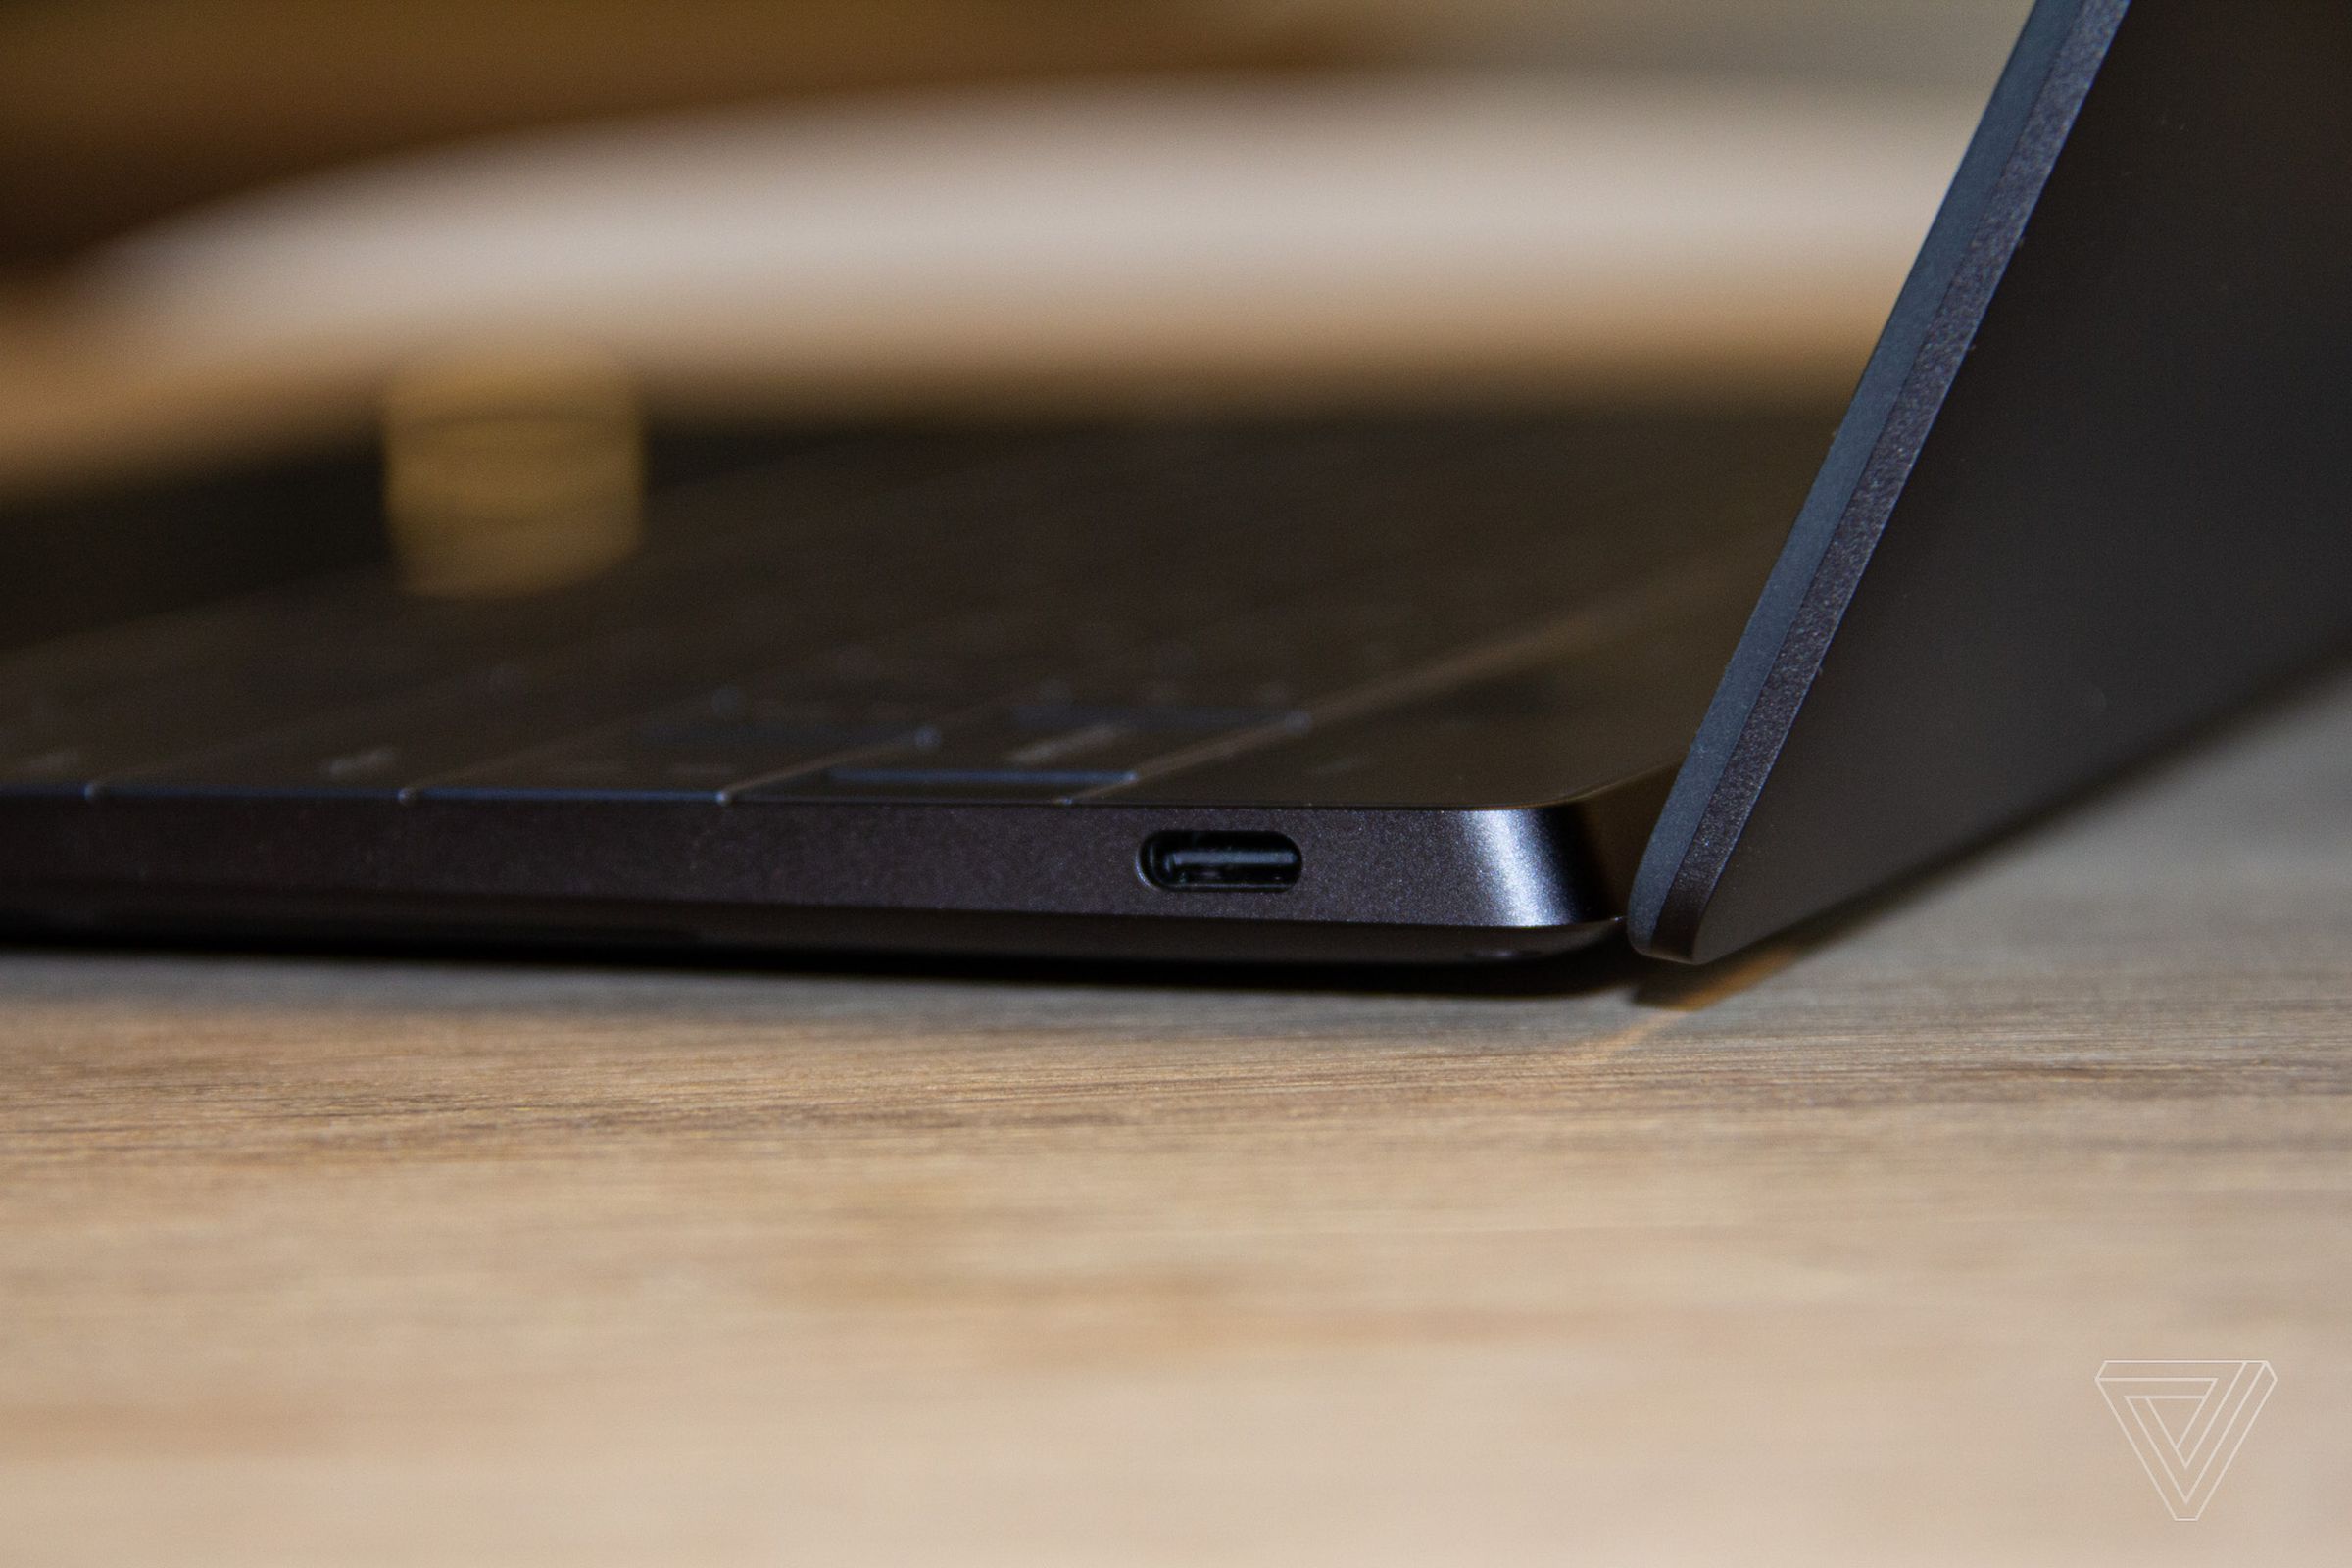 The USB-C port on the right side of the Dell XPS 13 Plus.